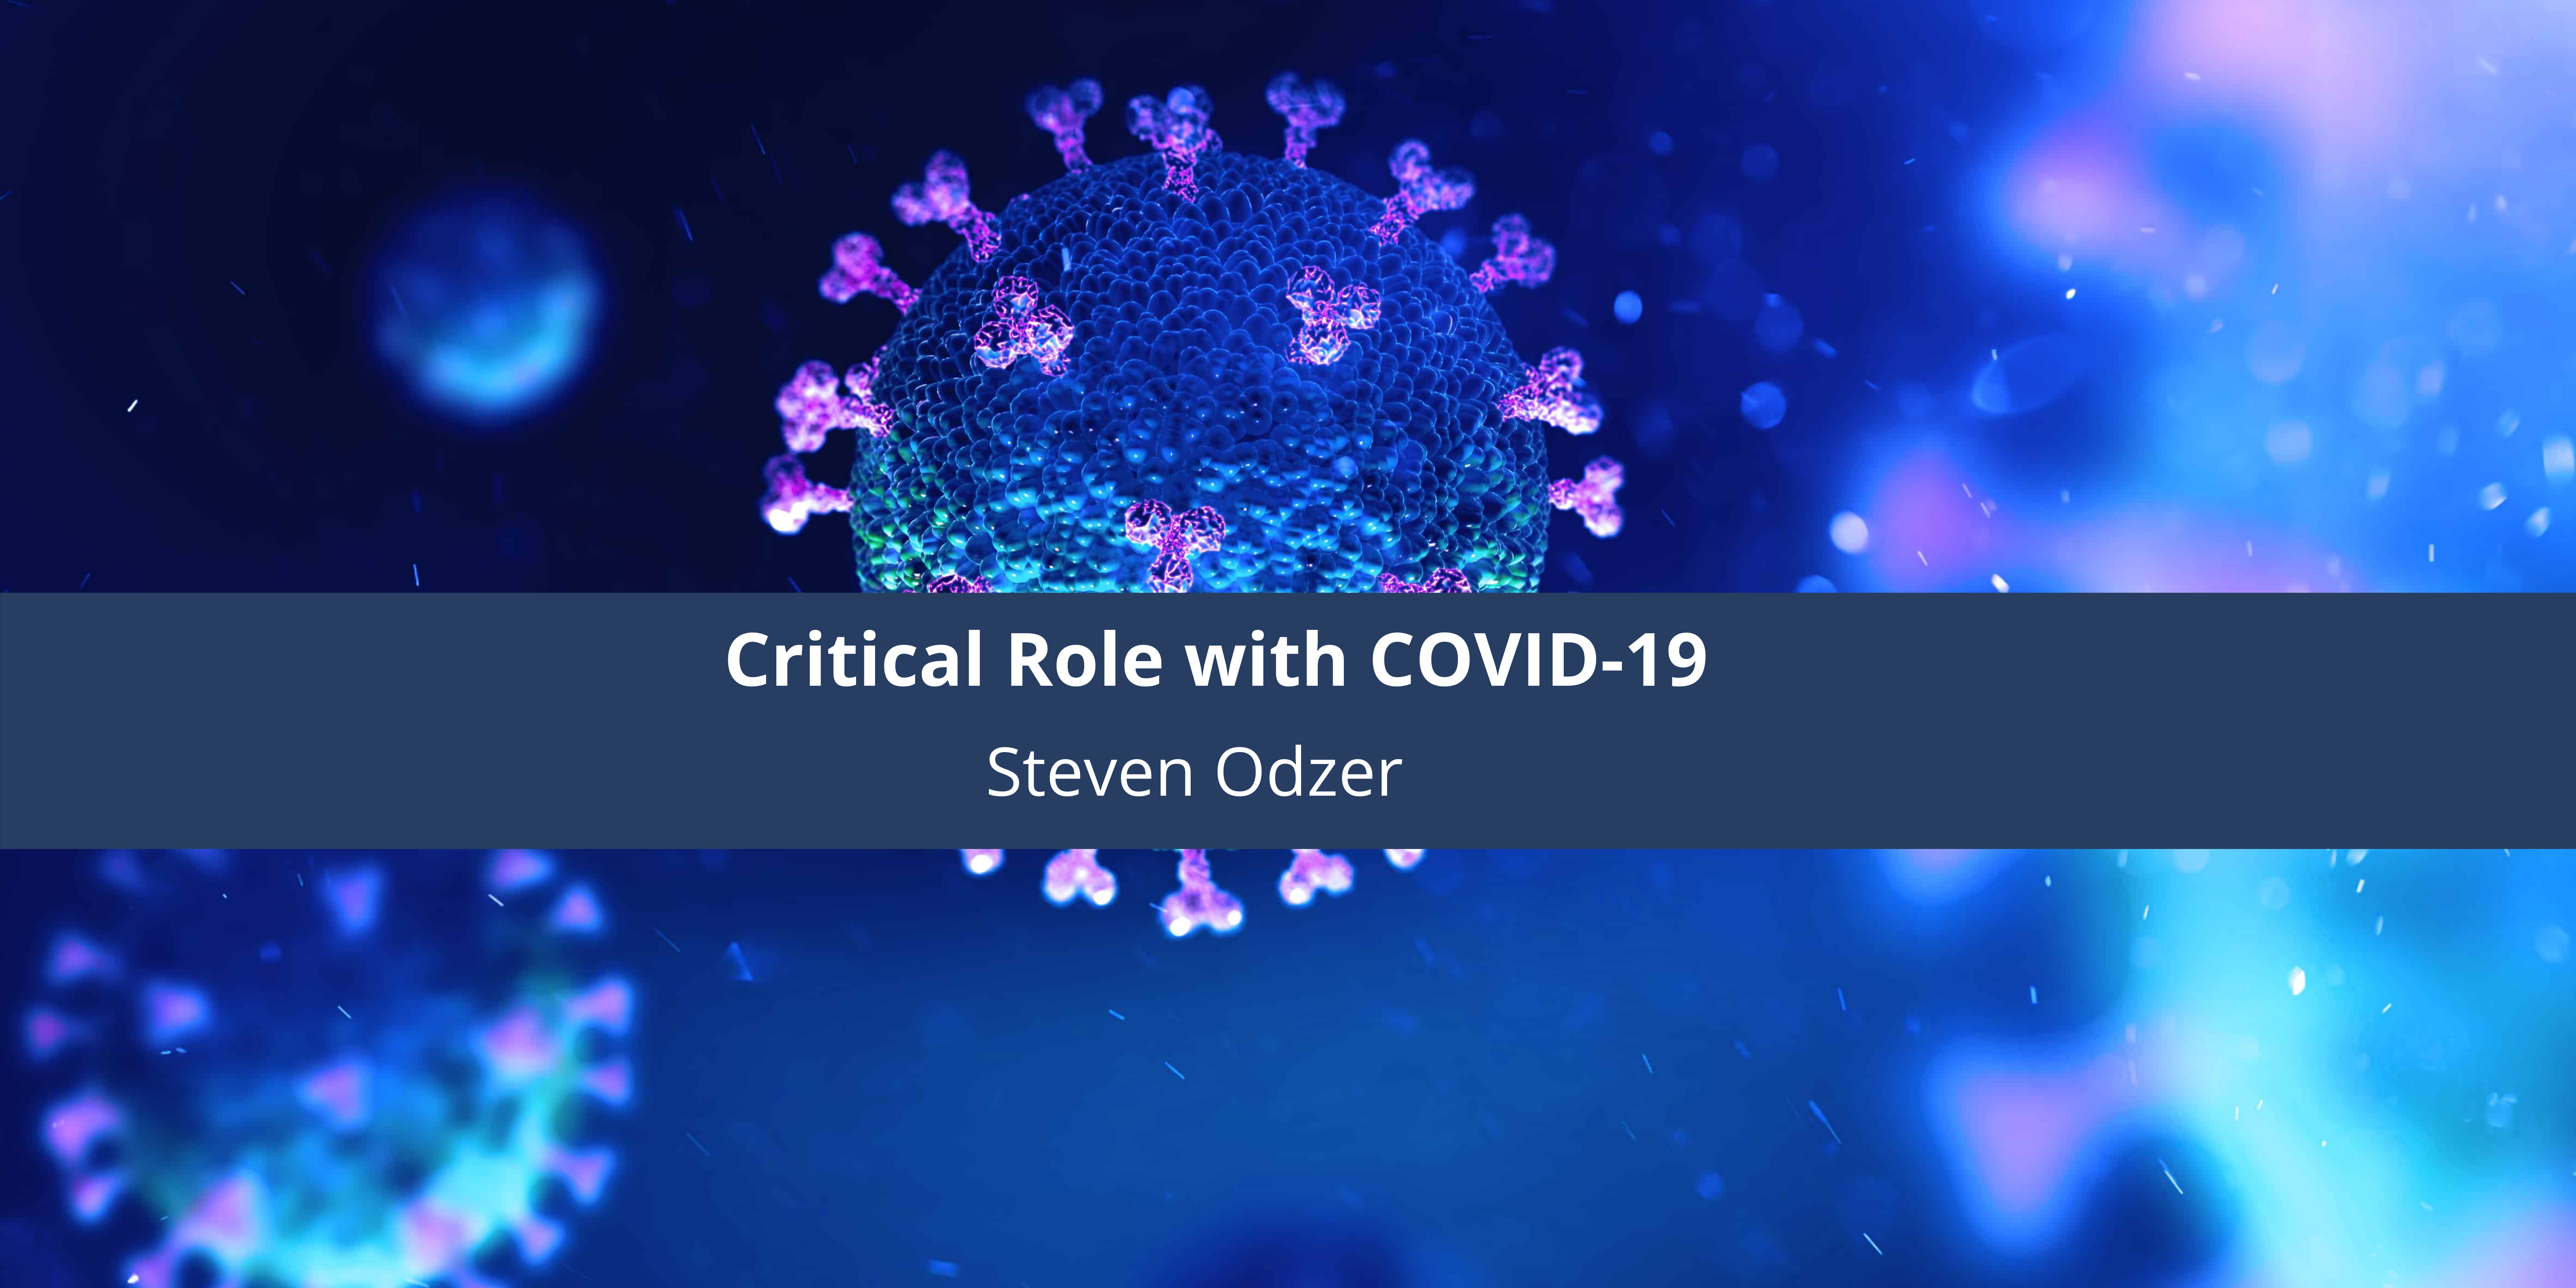 Critical Role with COVID-19